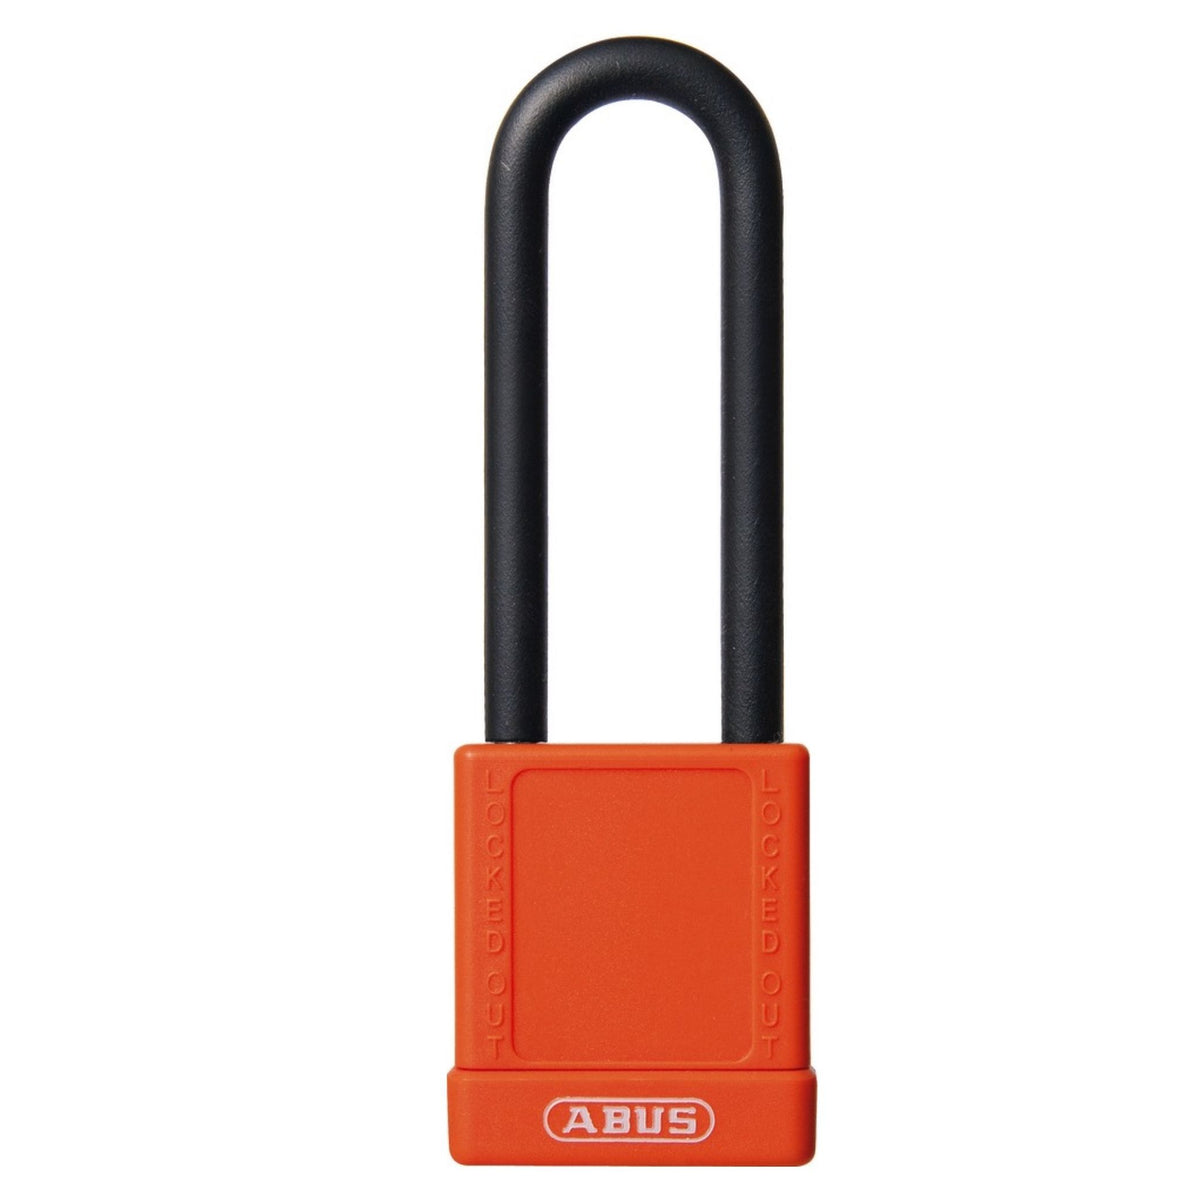 Abus 74/40HB75 KD Keyed Different Orange Safety Padlock, 3-Inch Shackle - The Lock Source